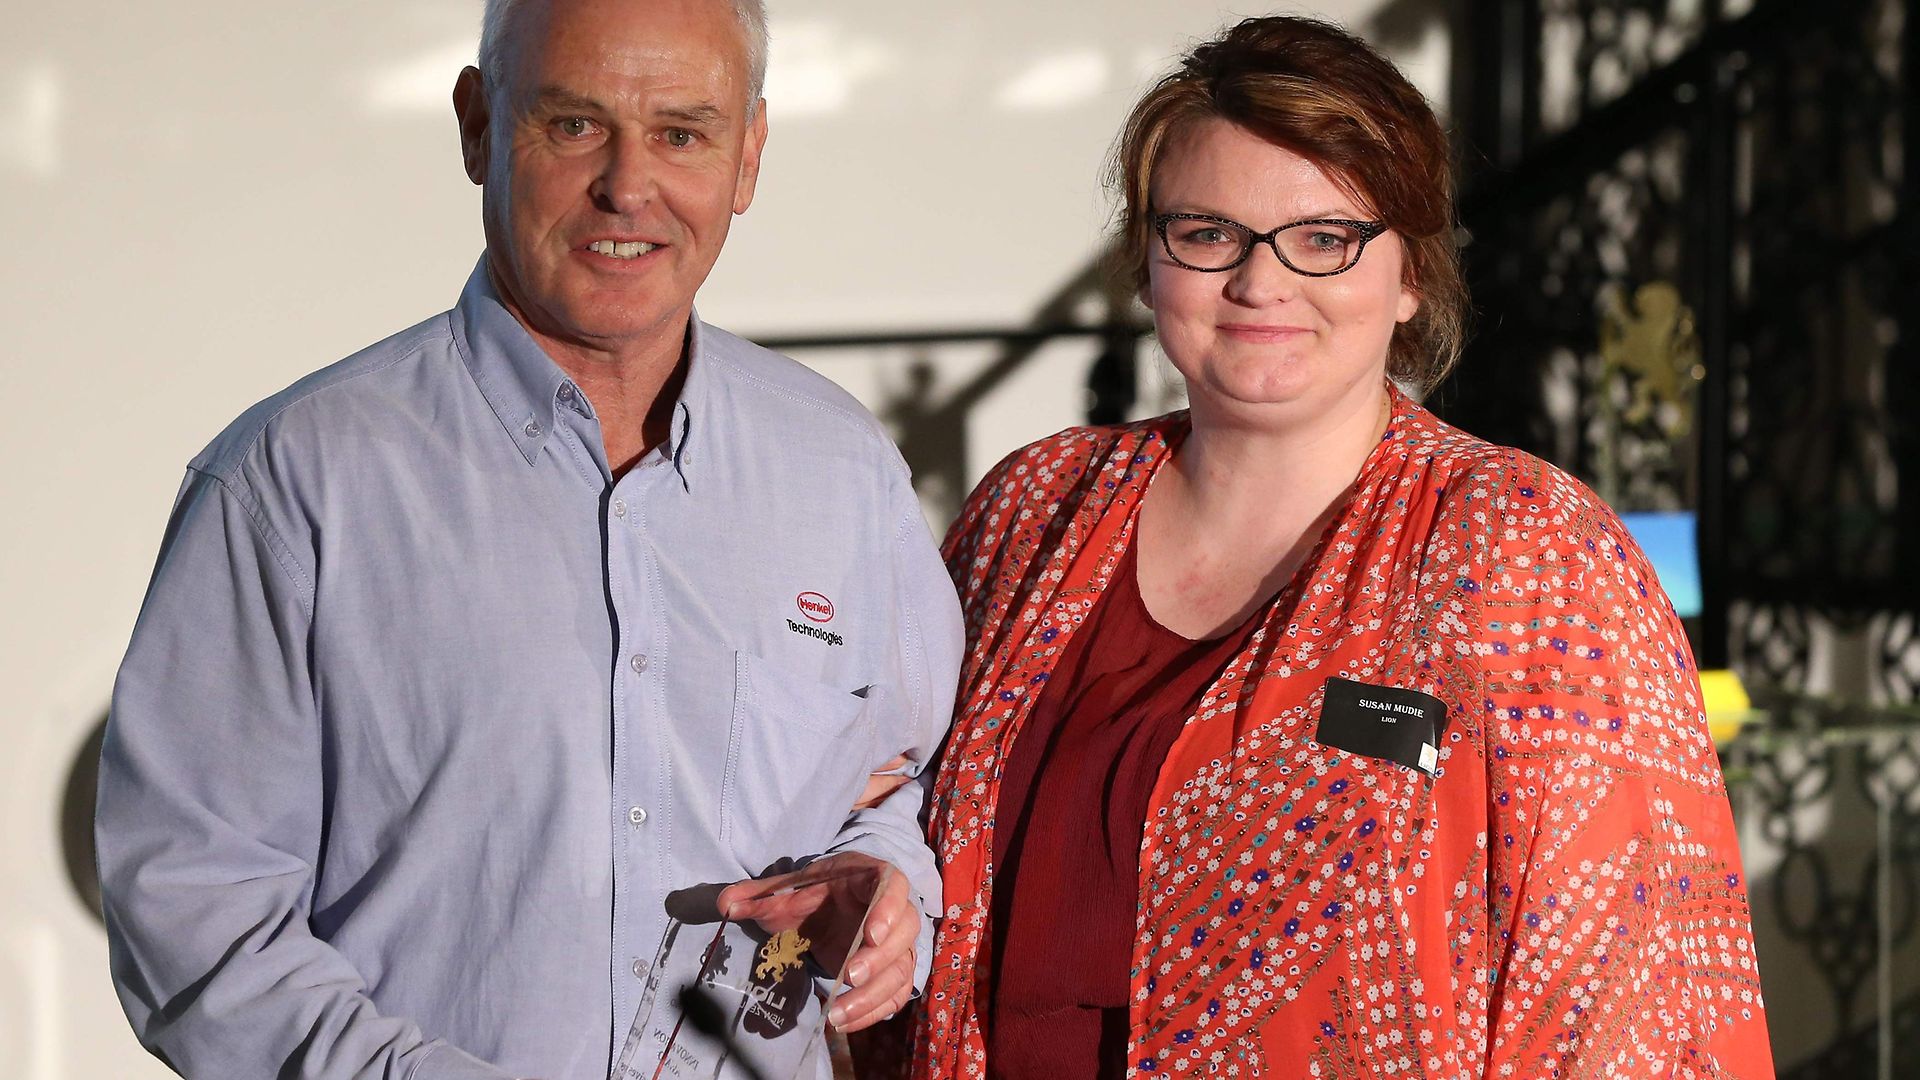 Colin Hooper, Account Manager Adhesive Technologies, Henkel New Zealand, accepted the innovation award from Susan Mudi, Innovation Manager, Lion Beer, Spirits & Wine (New Zealand).